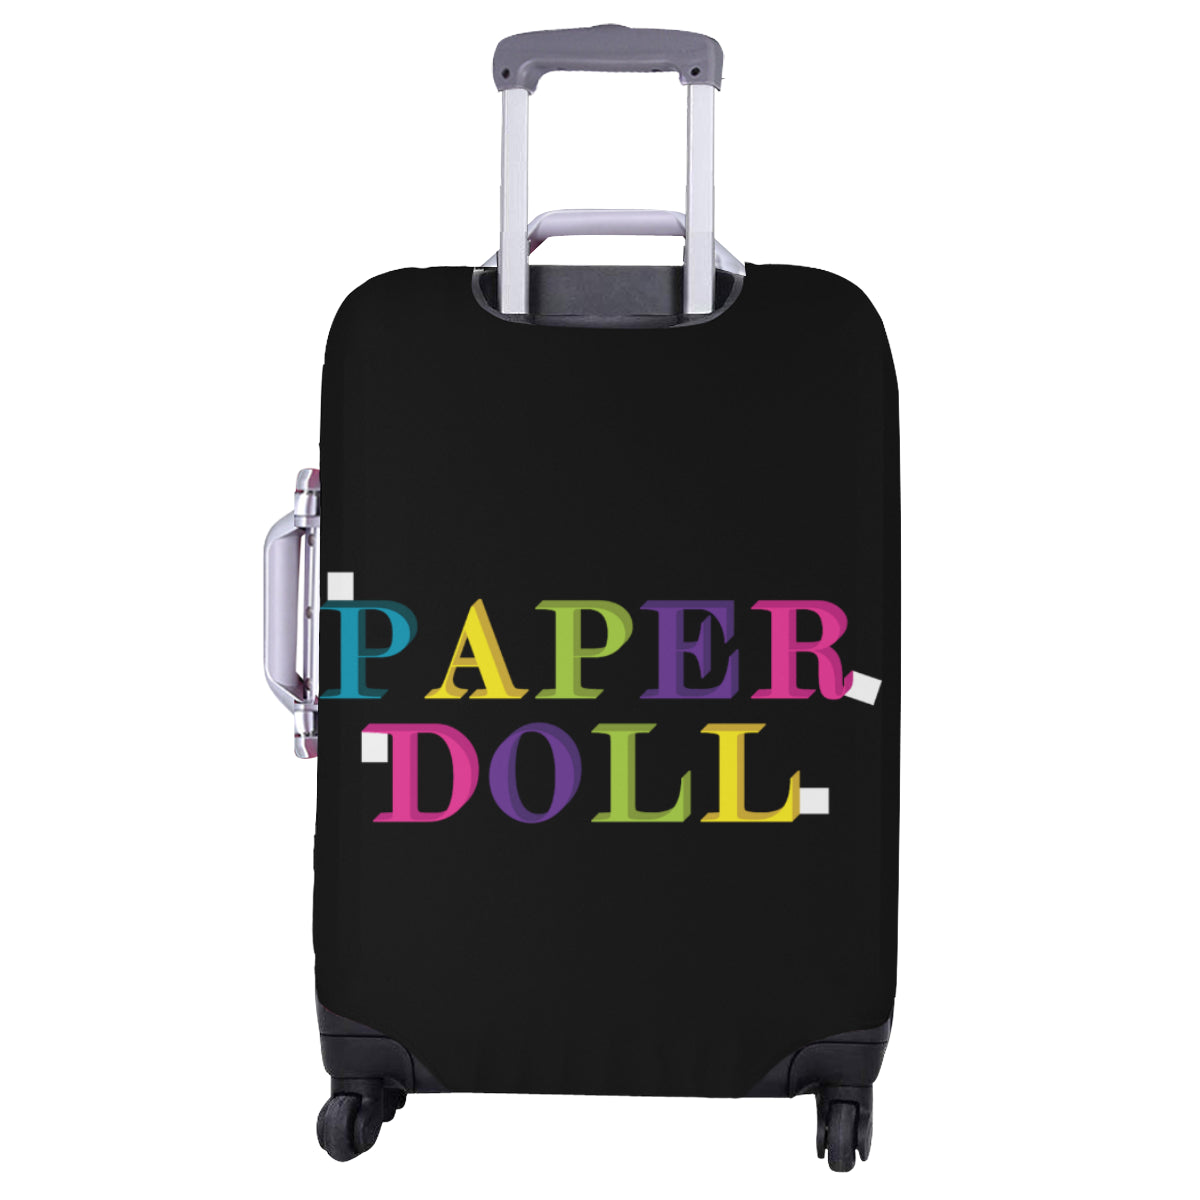 PAPER DOLL DRESS LUGGAGE COVER - LARGE